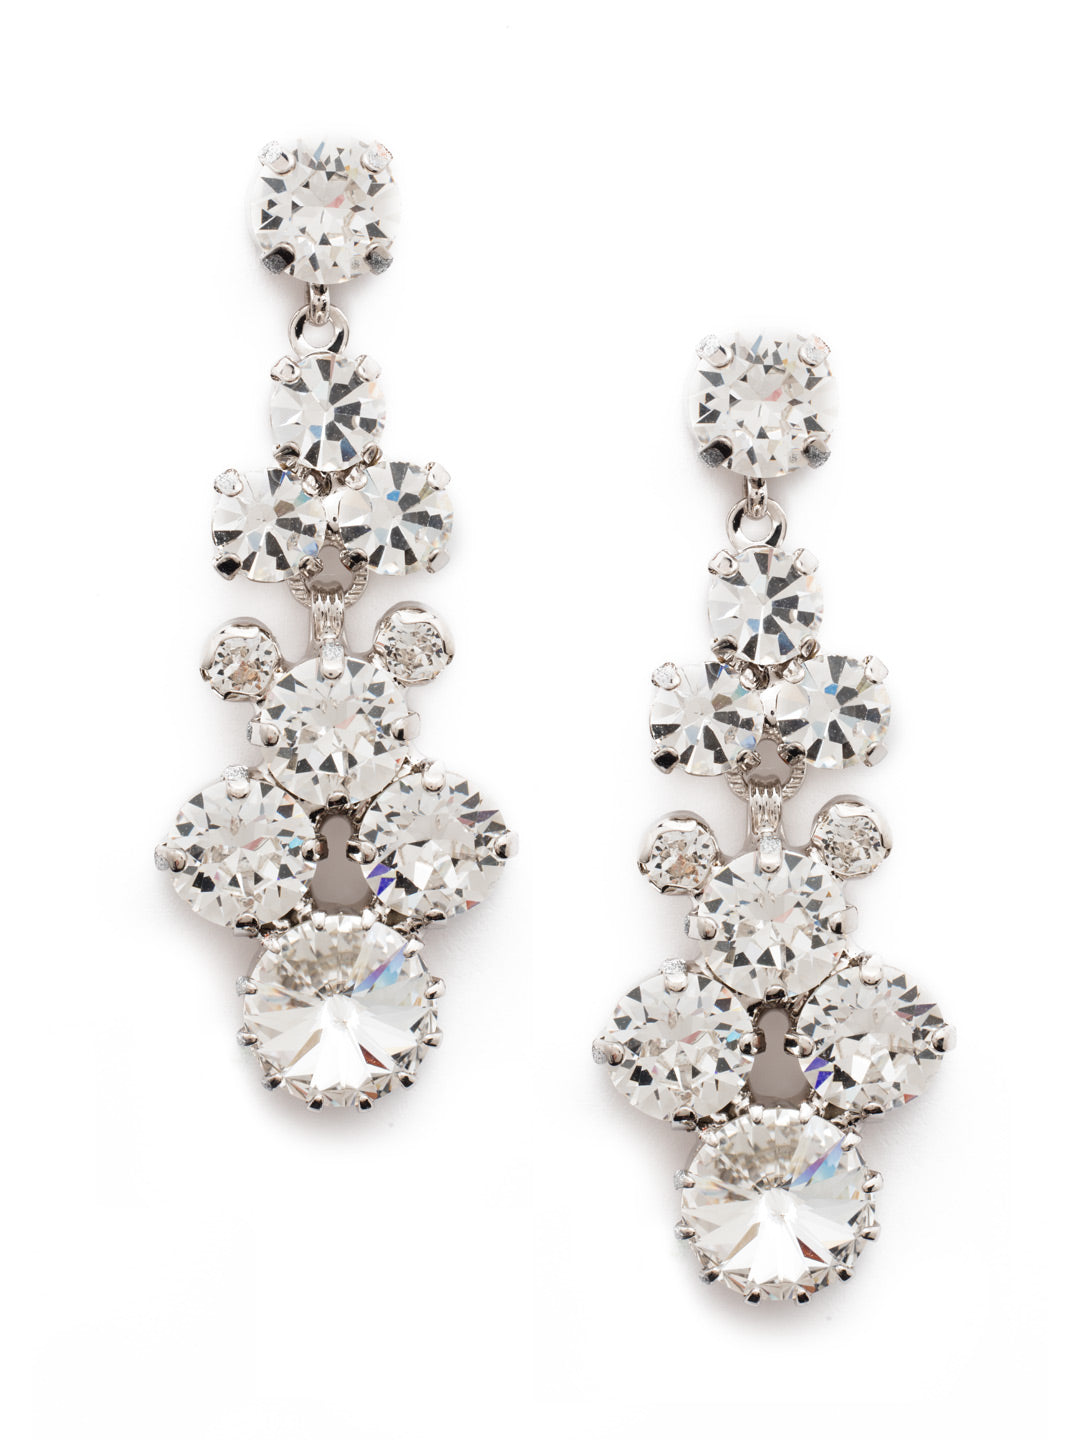 Well-Rounded Crystal Drop Dangle Earrings - EDH27RHCRY - <p>Our Well-Rounded Crystal Drop Earring features an array of round crystals cascading from a post. Crystal clusters form this exquisite earring for a magnificent statement. From Sorrelli's Crystal collection in our Palladium Silver-tone finish.</p>